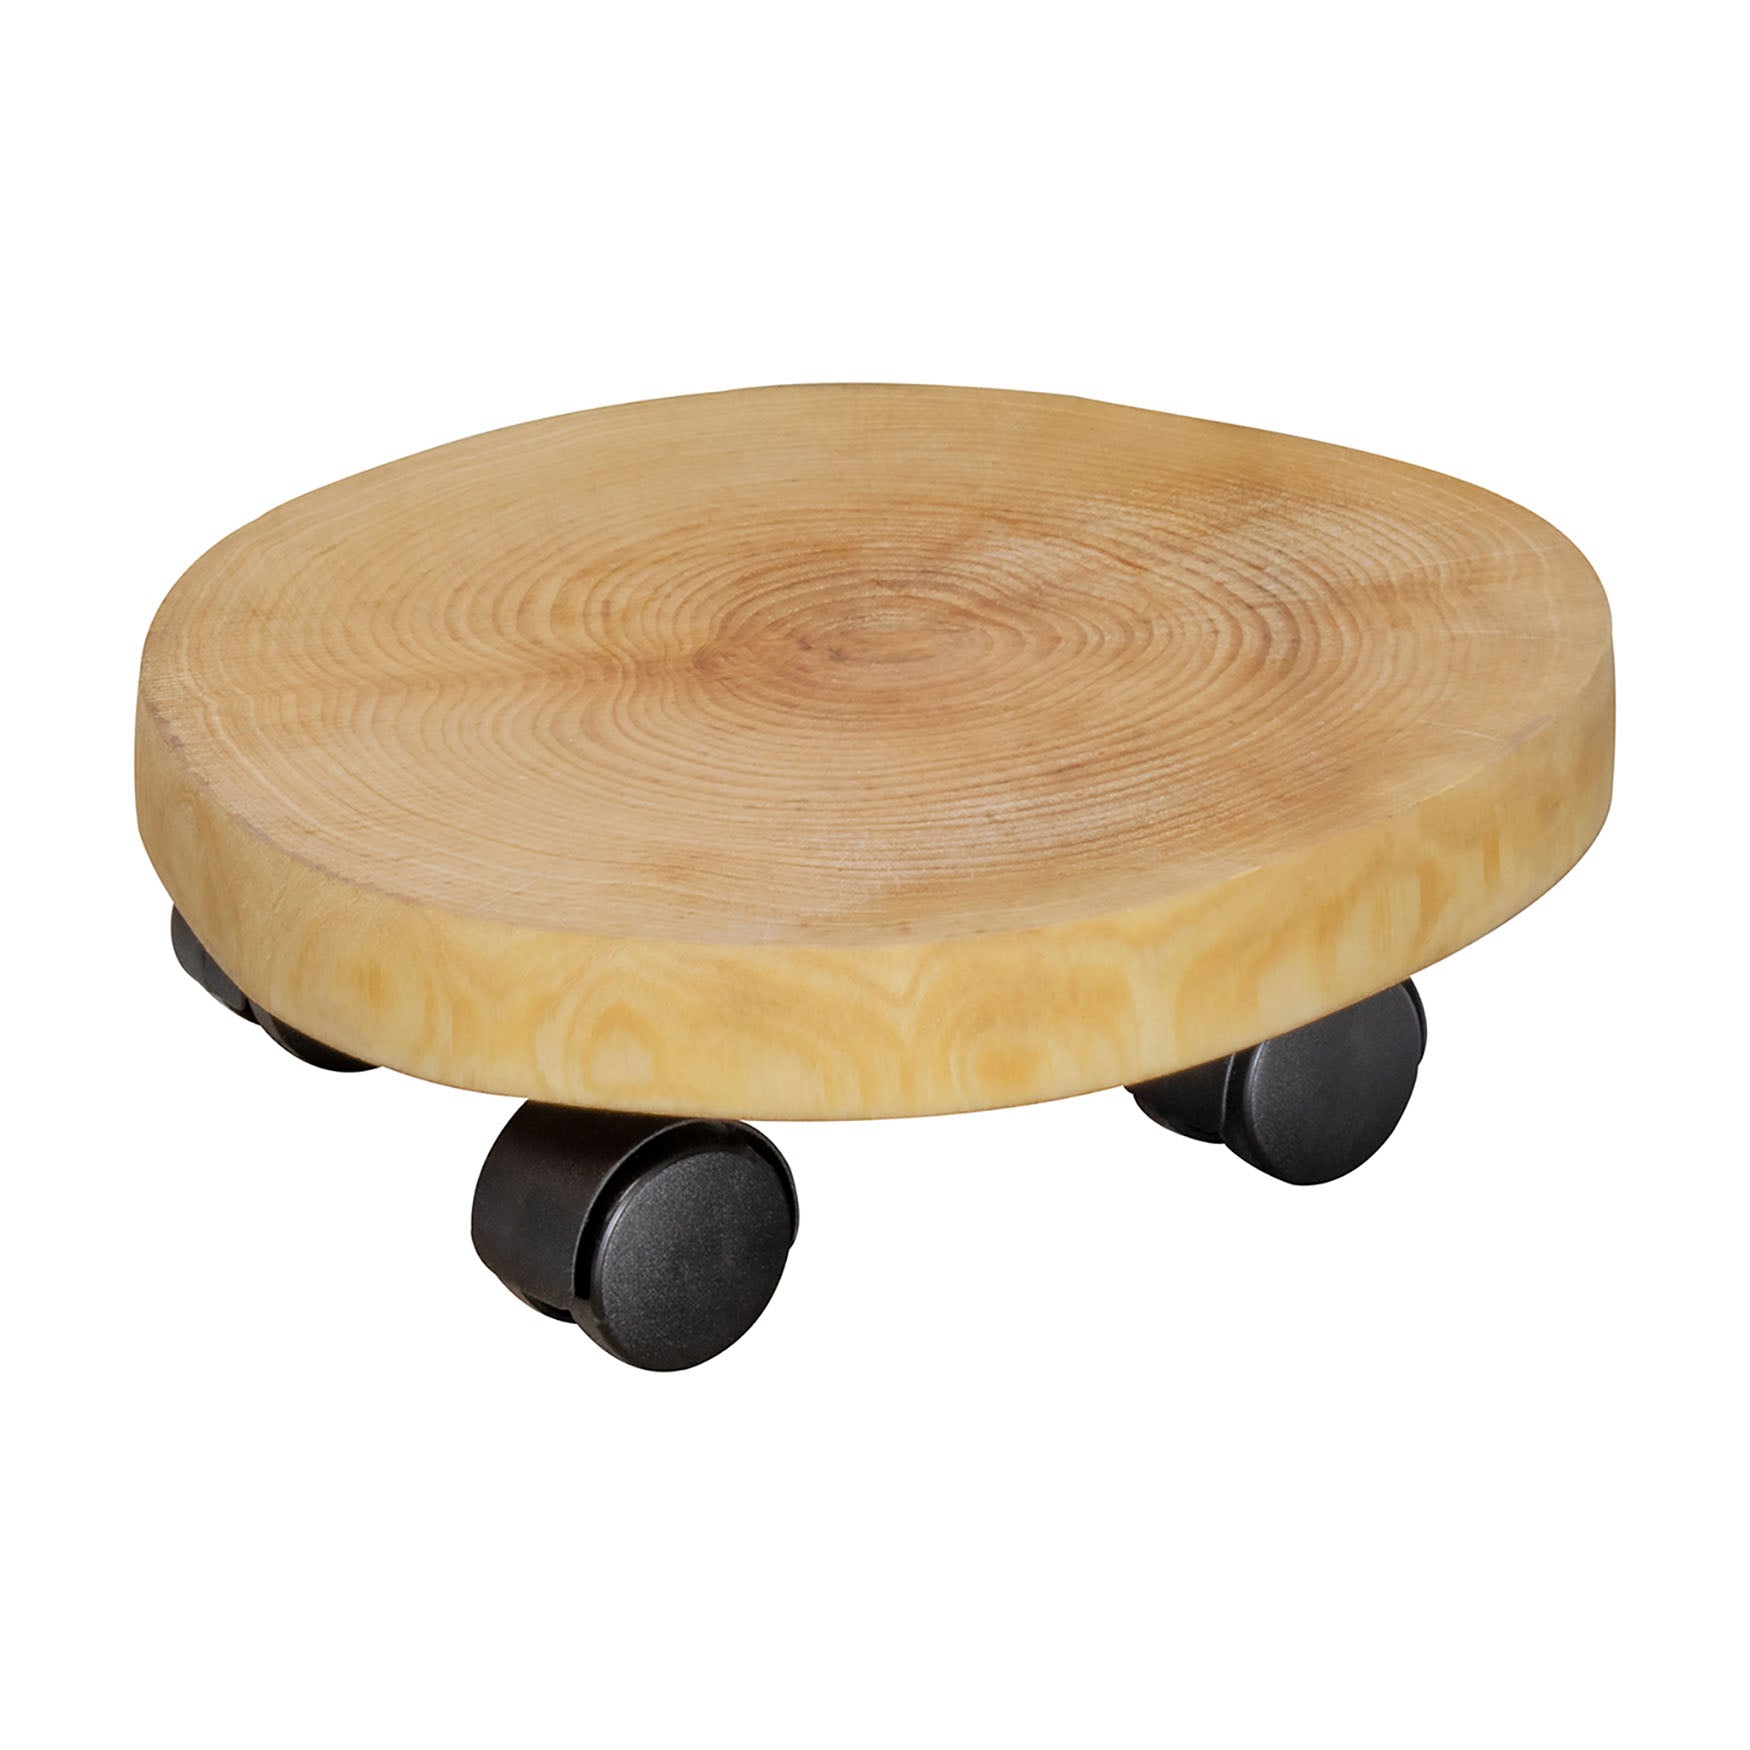 10" natural birch round wooden plant caddy. 110 lbs. capacity. 9.8-11.8"D x 3.25"H 2.5 lbs.